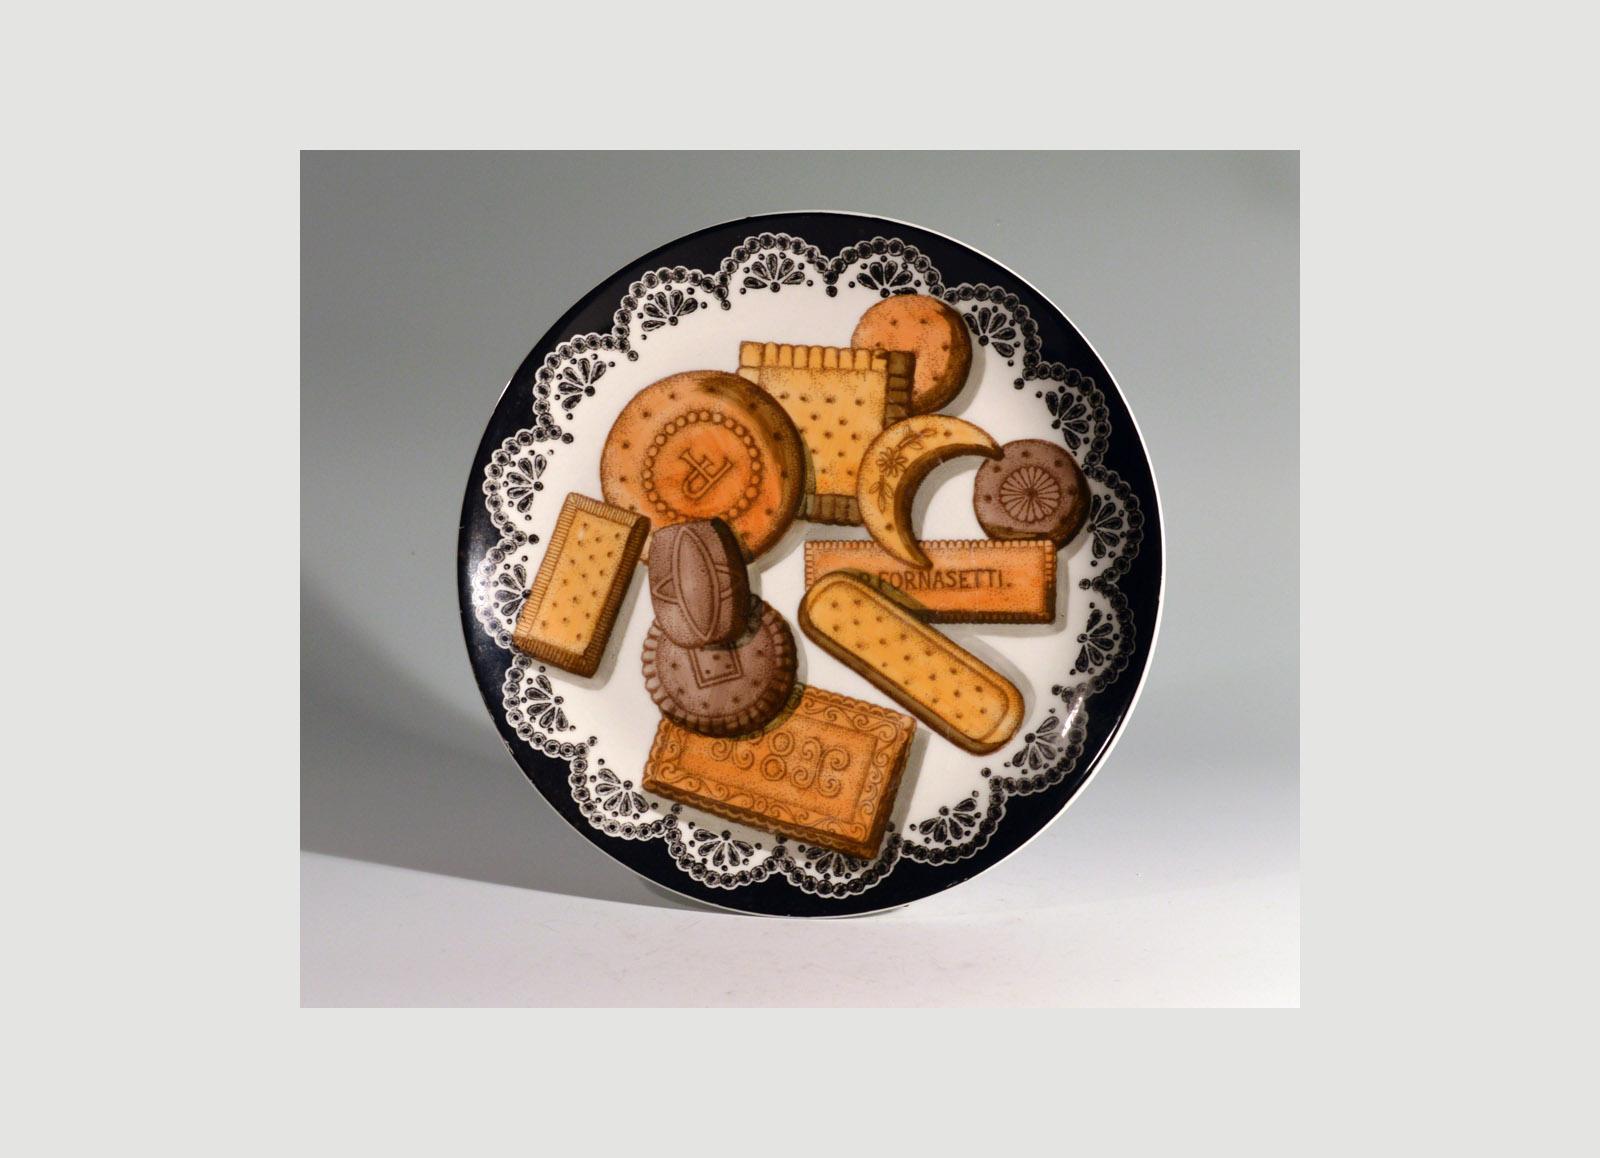 Piero Fornasetti Biscotti Pattern Porcelain Plate, with Trompe l'oeil Cookies 1